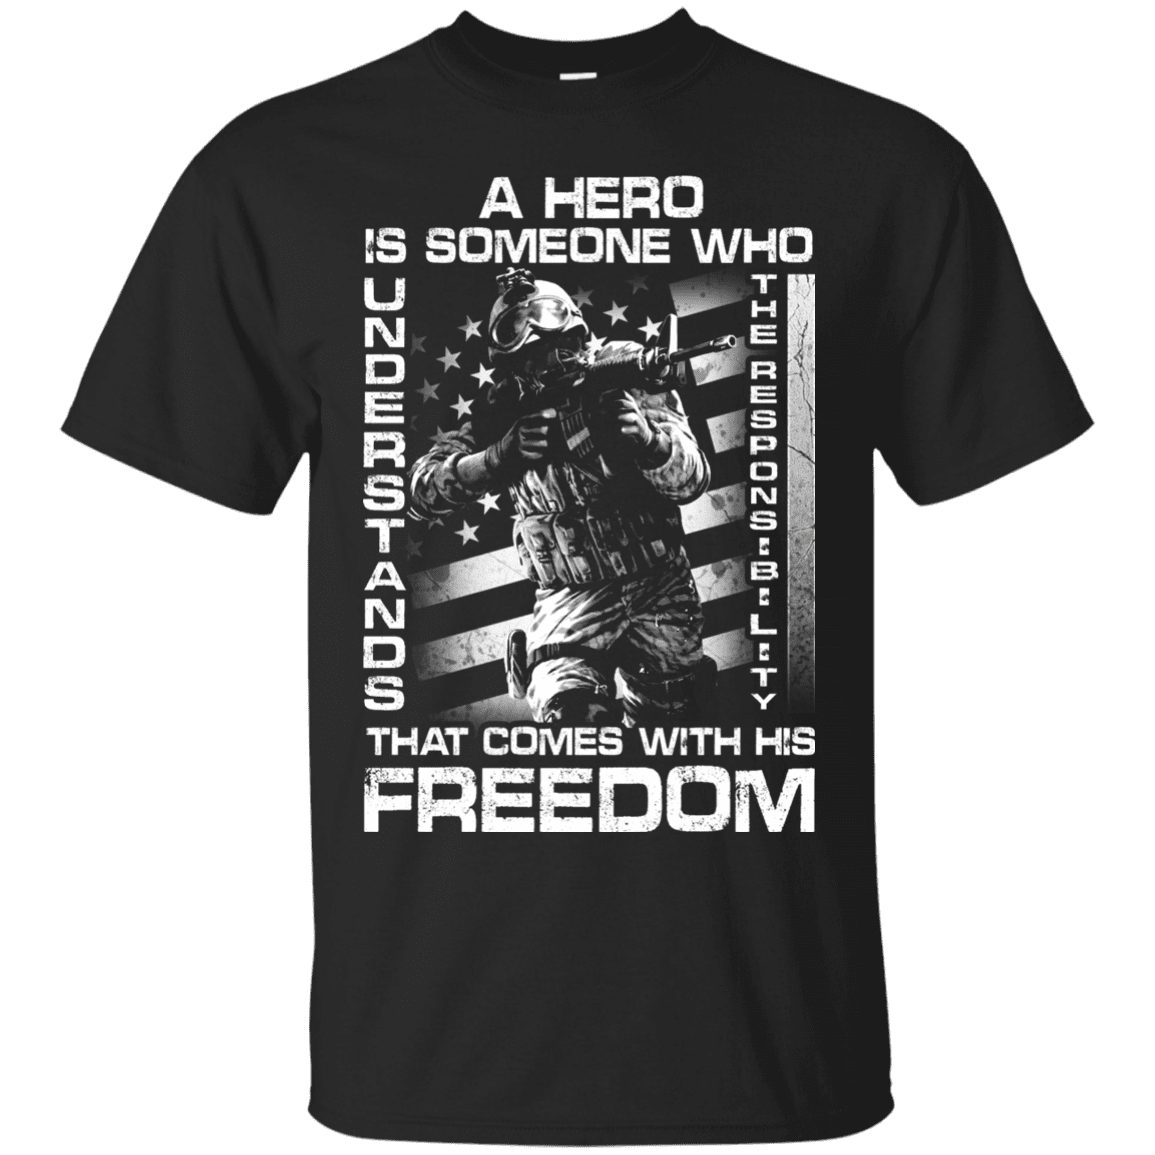 Military T-Shirt ”A Hero Is Someone Who Understands The Responsibility”